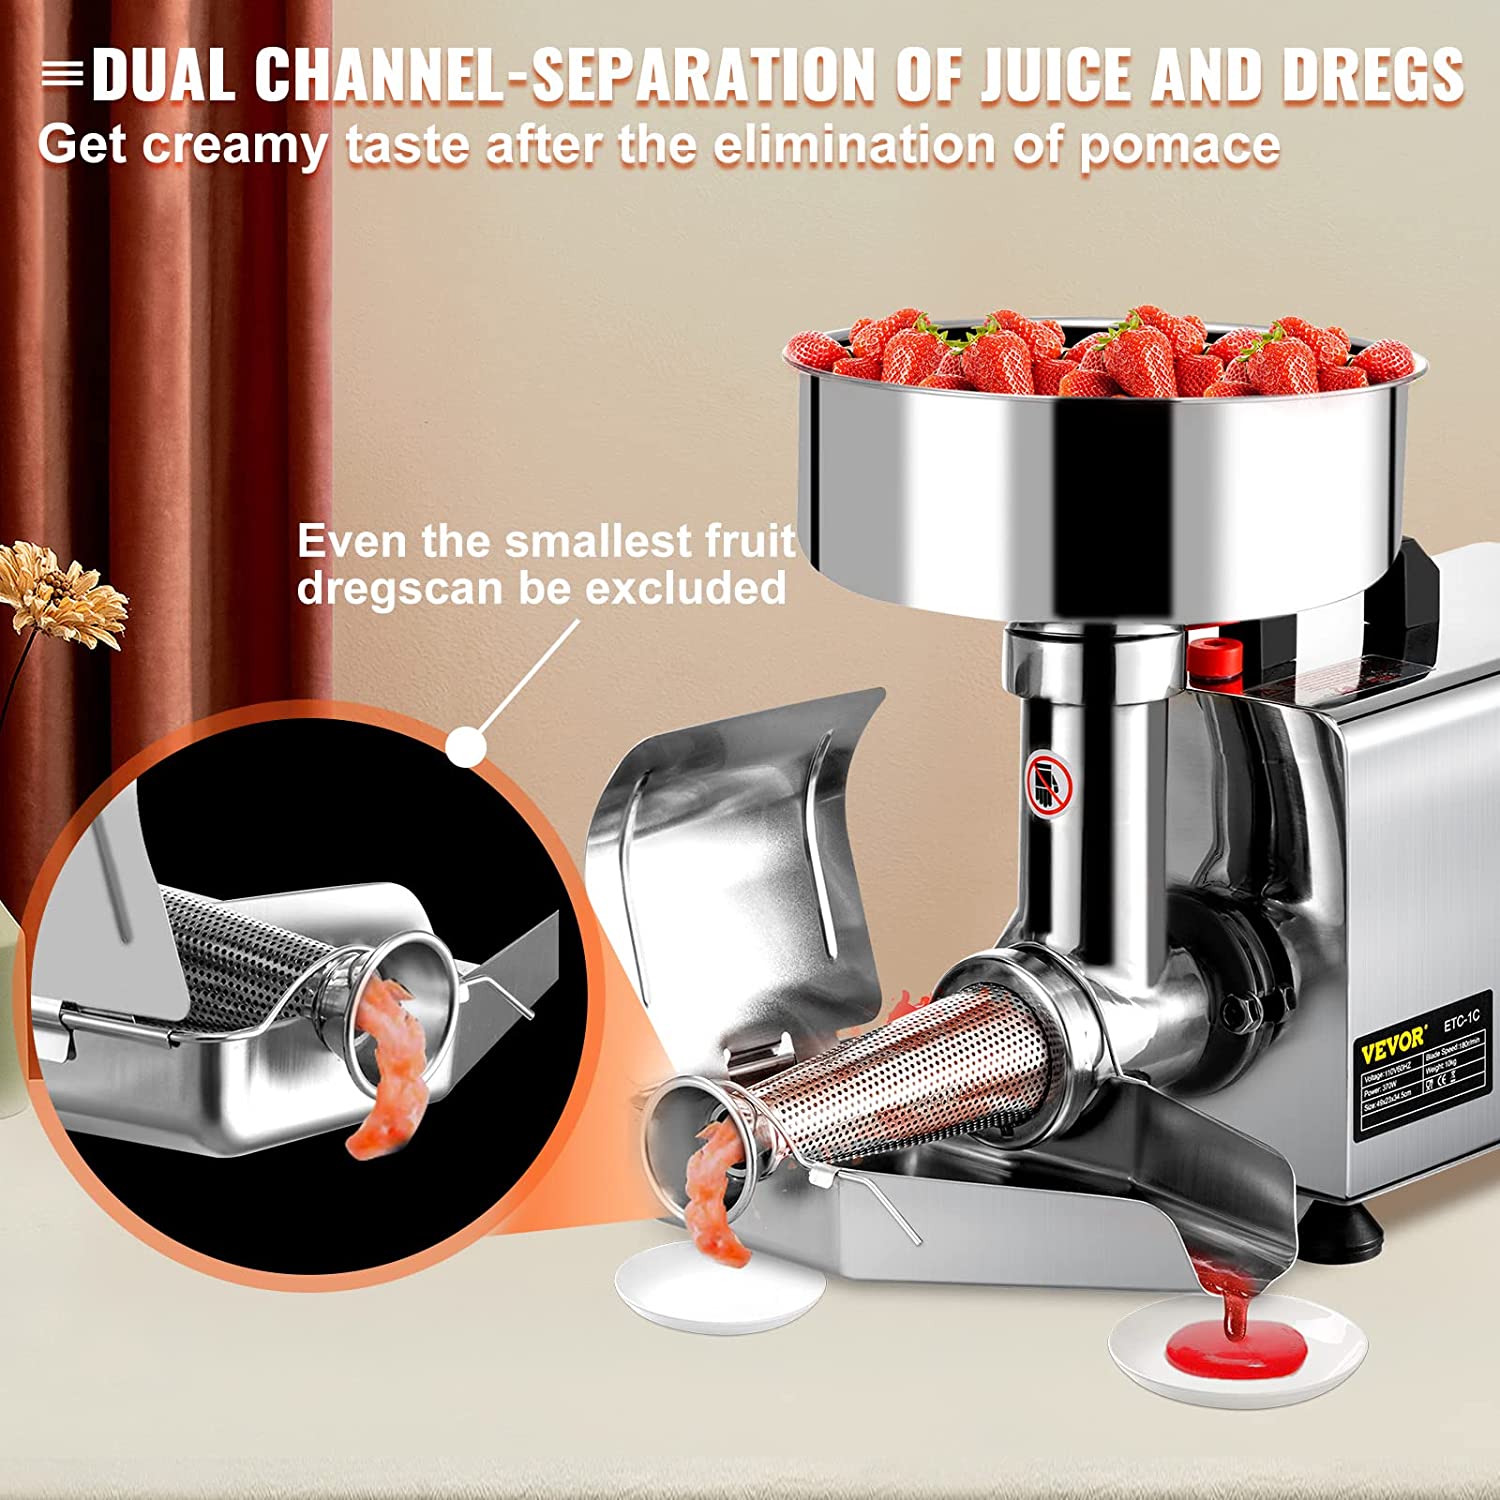 Electric Tomato Strainer I Commercial Grade Tomato Milling Machine I Stainless Steel Tomato Press and Strainer